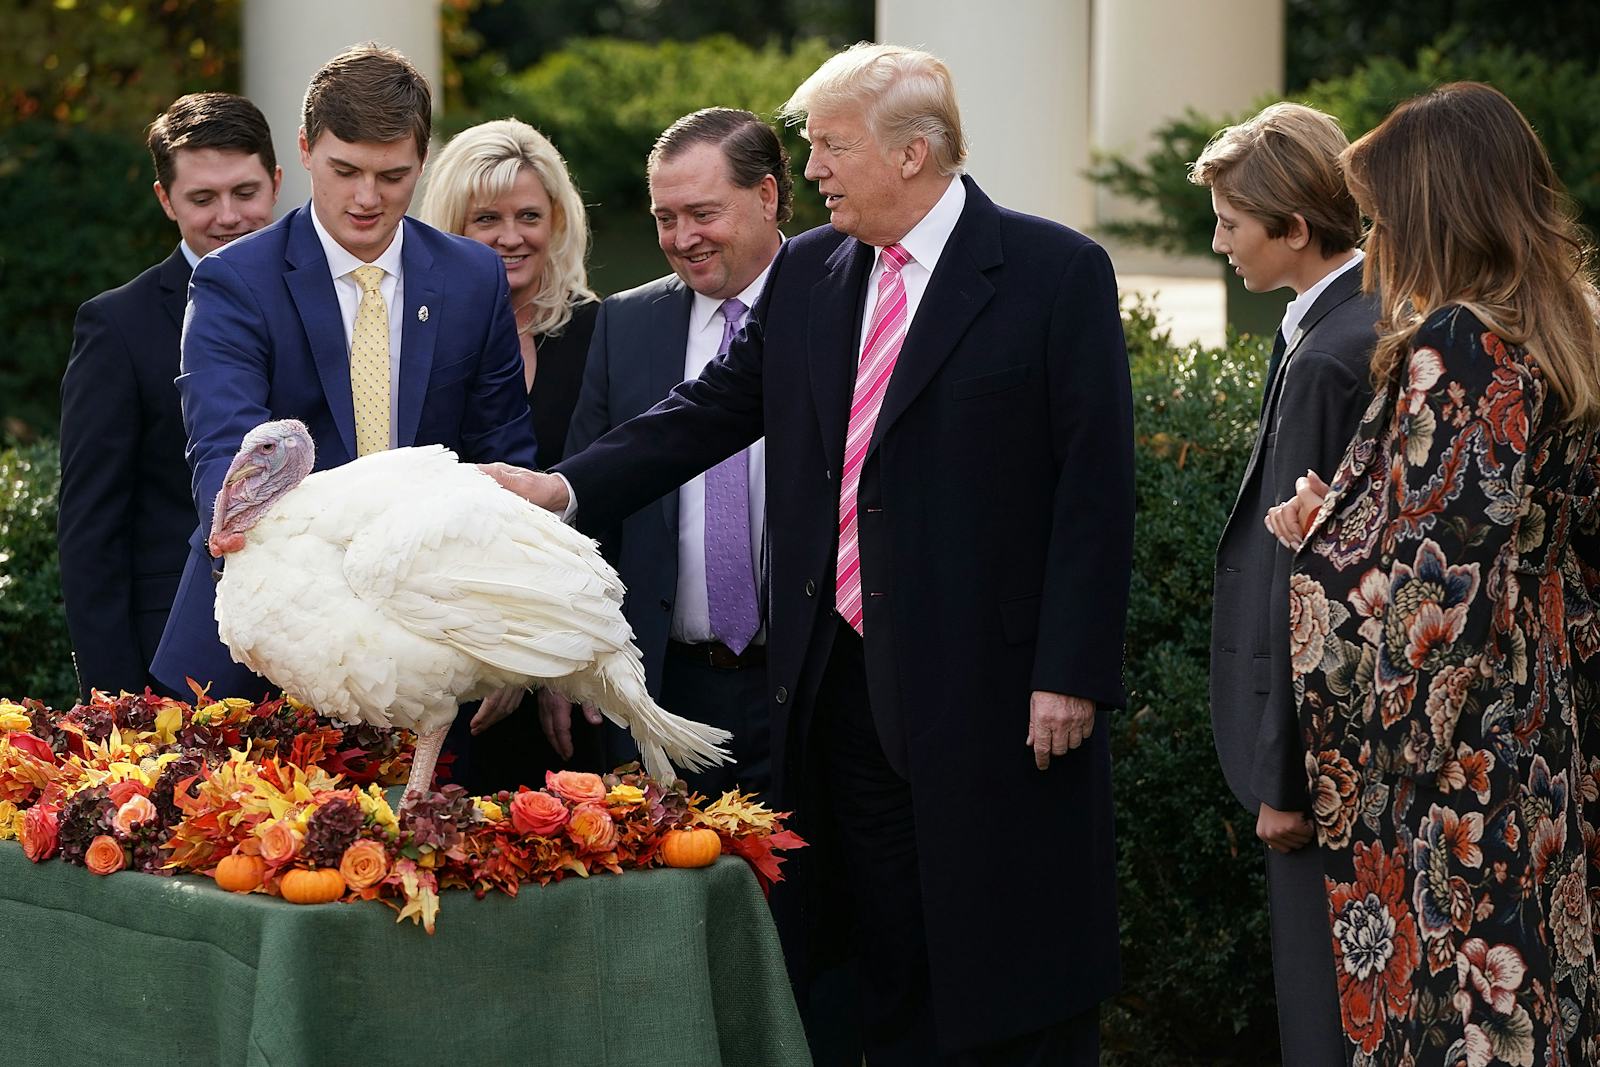 Trump Praises Himself In Thanksgiving Tweet "Your Country Is Starting